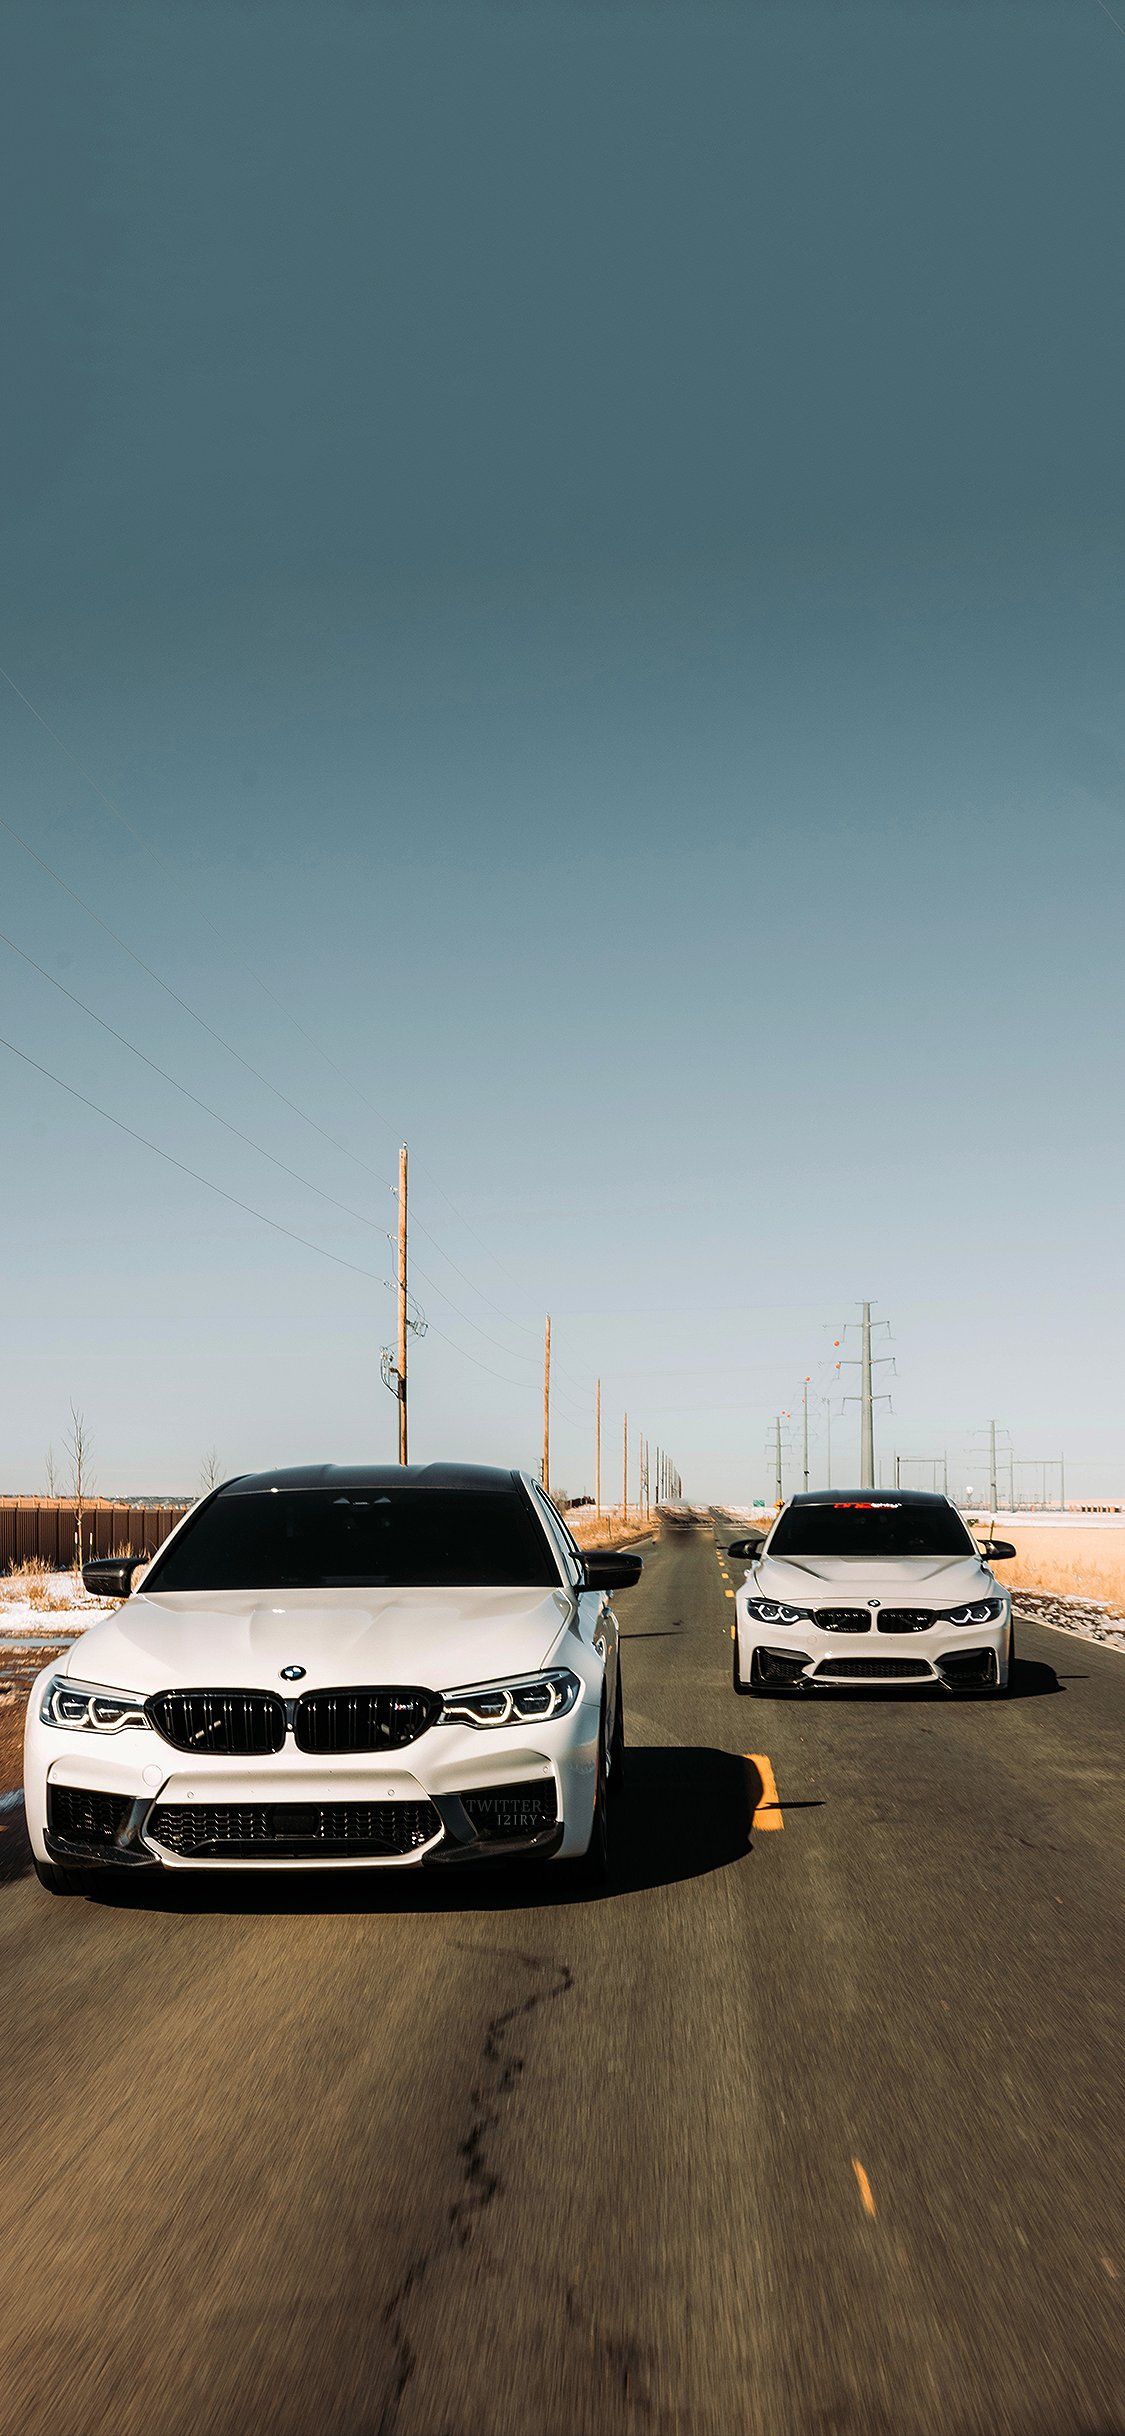 Two white BMW cars on the road. - BMW